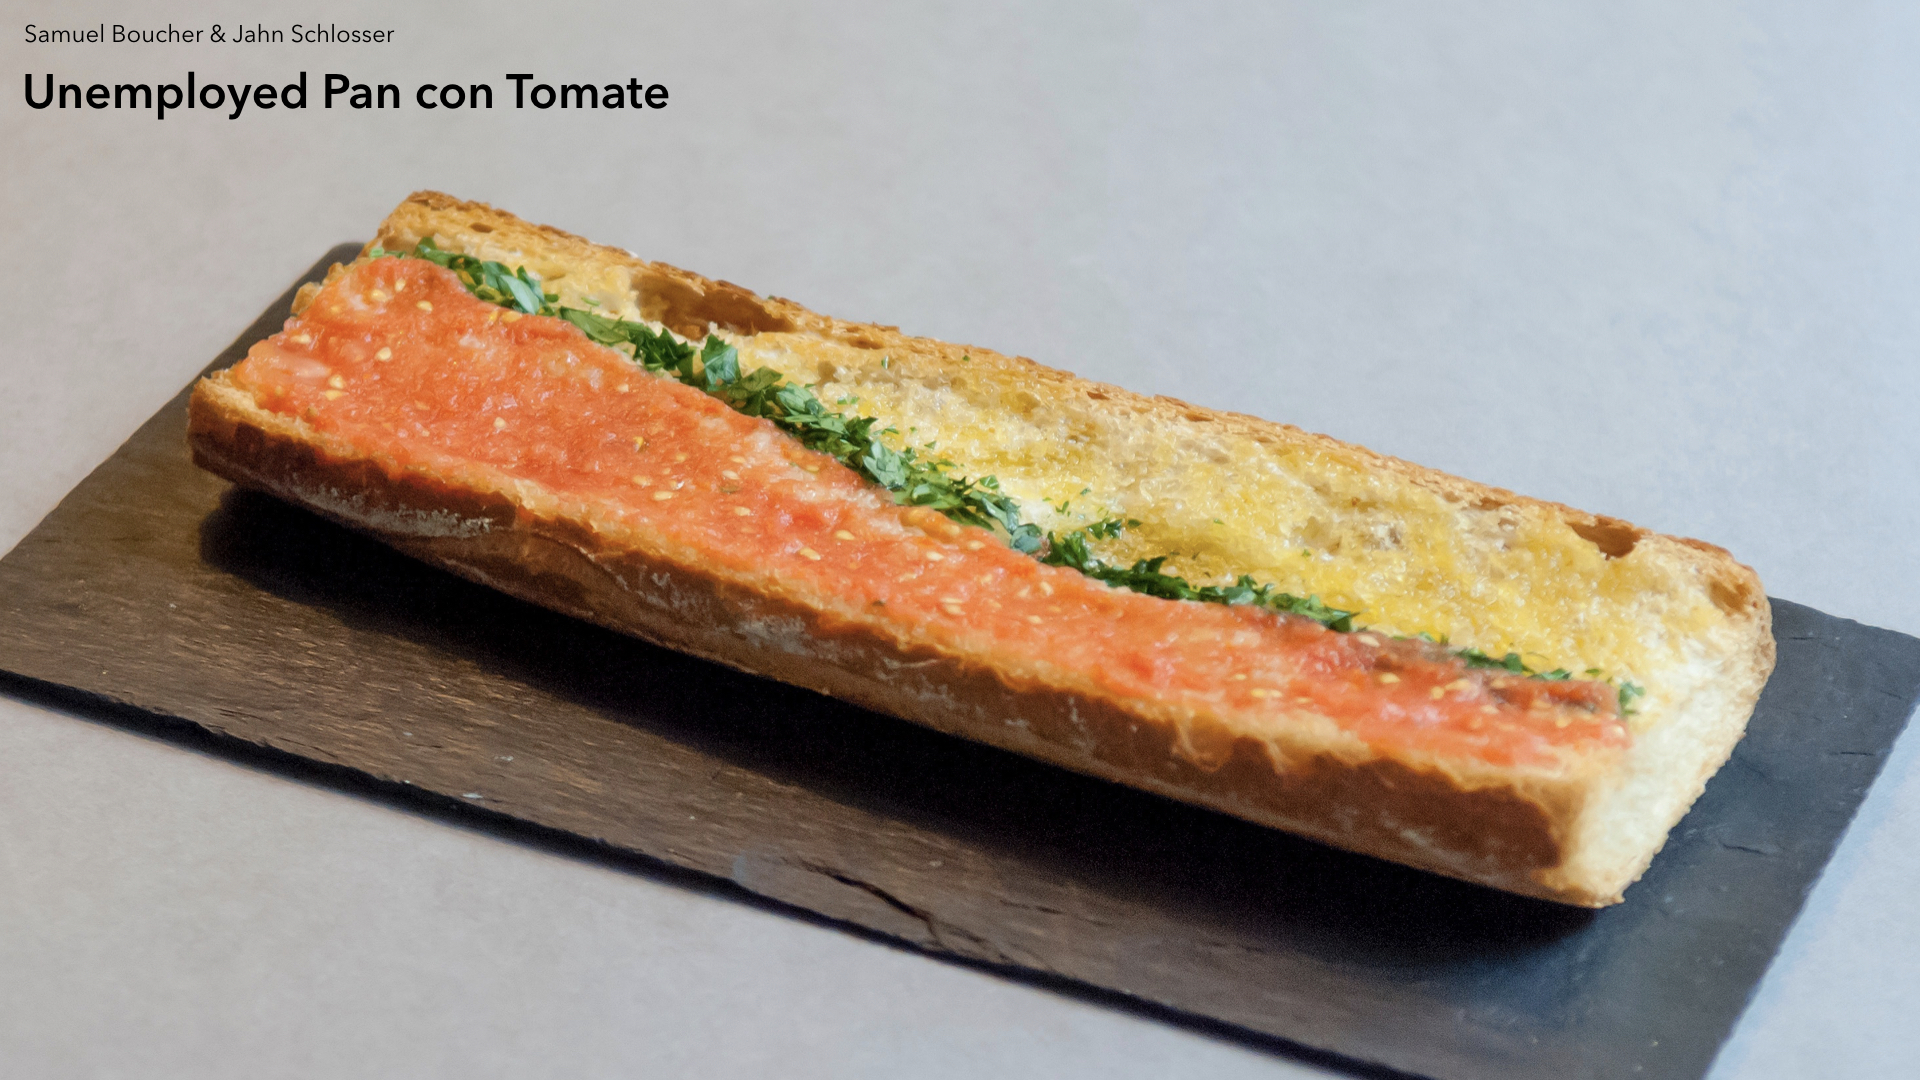 Result of a Data Cuisine workshop called 'Unemployed Pan con Tomate'